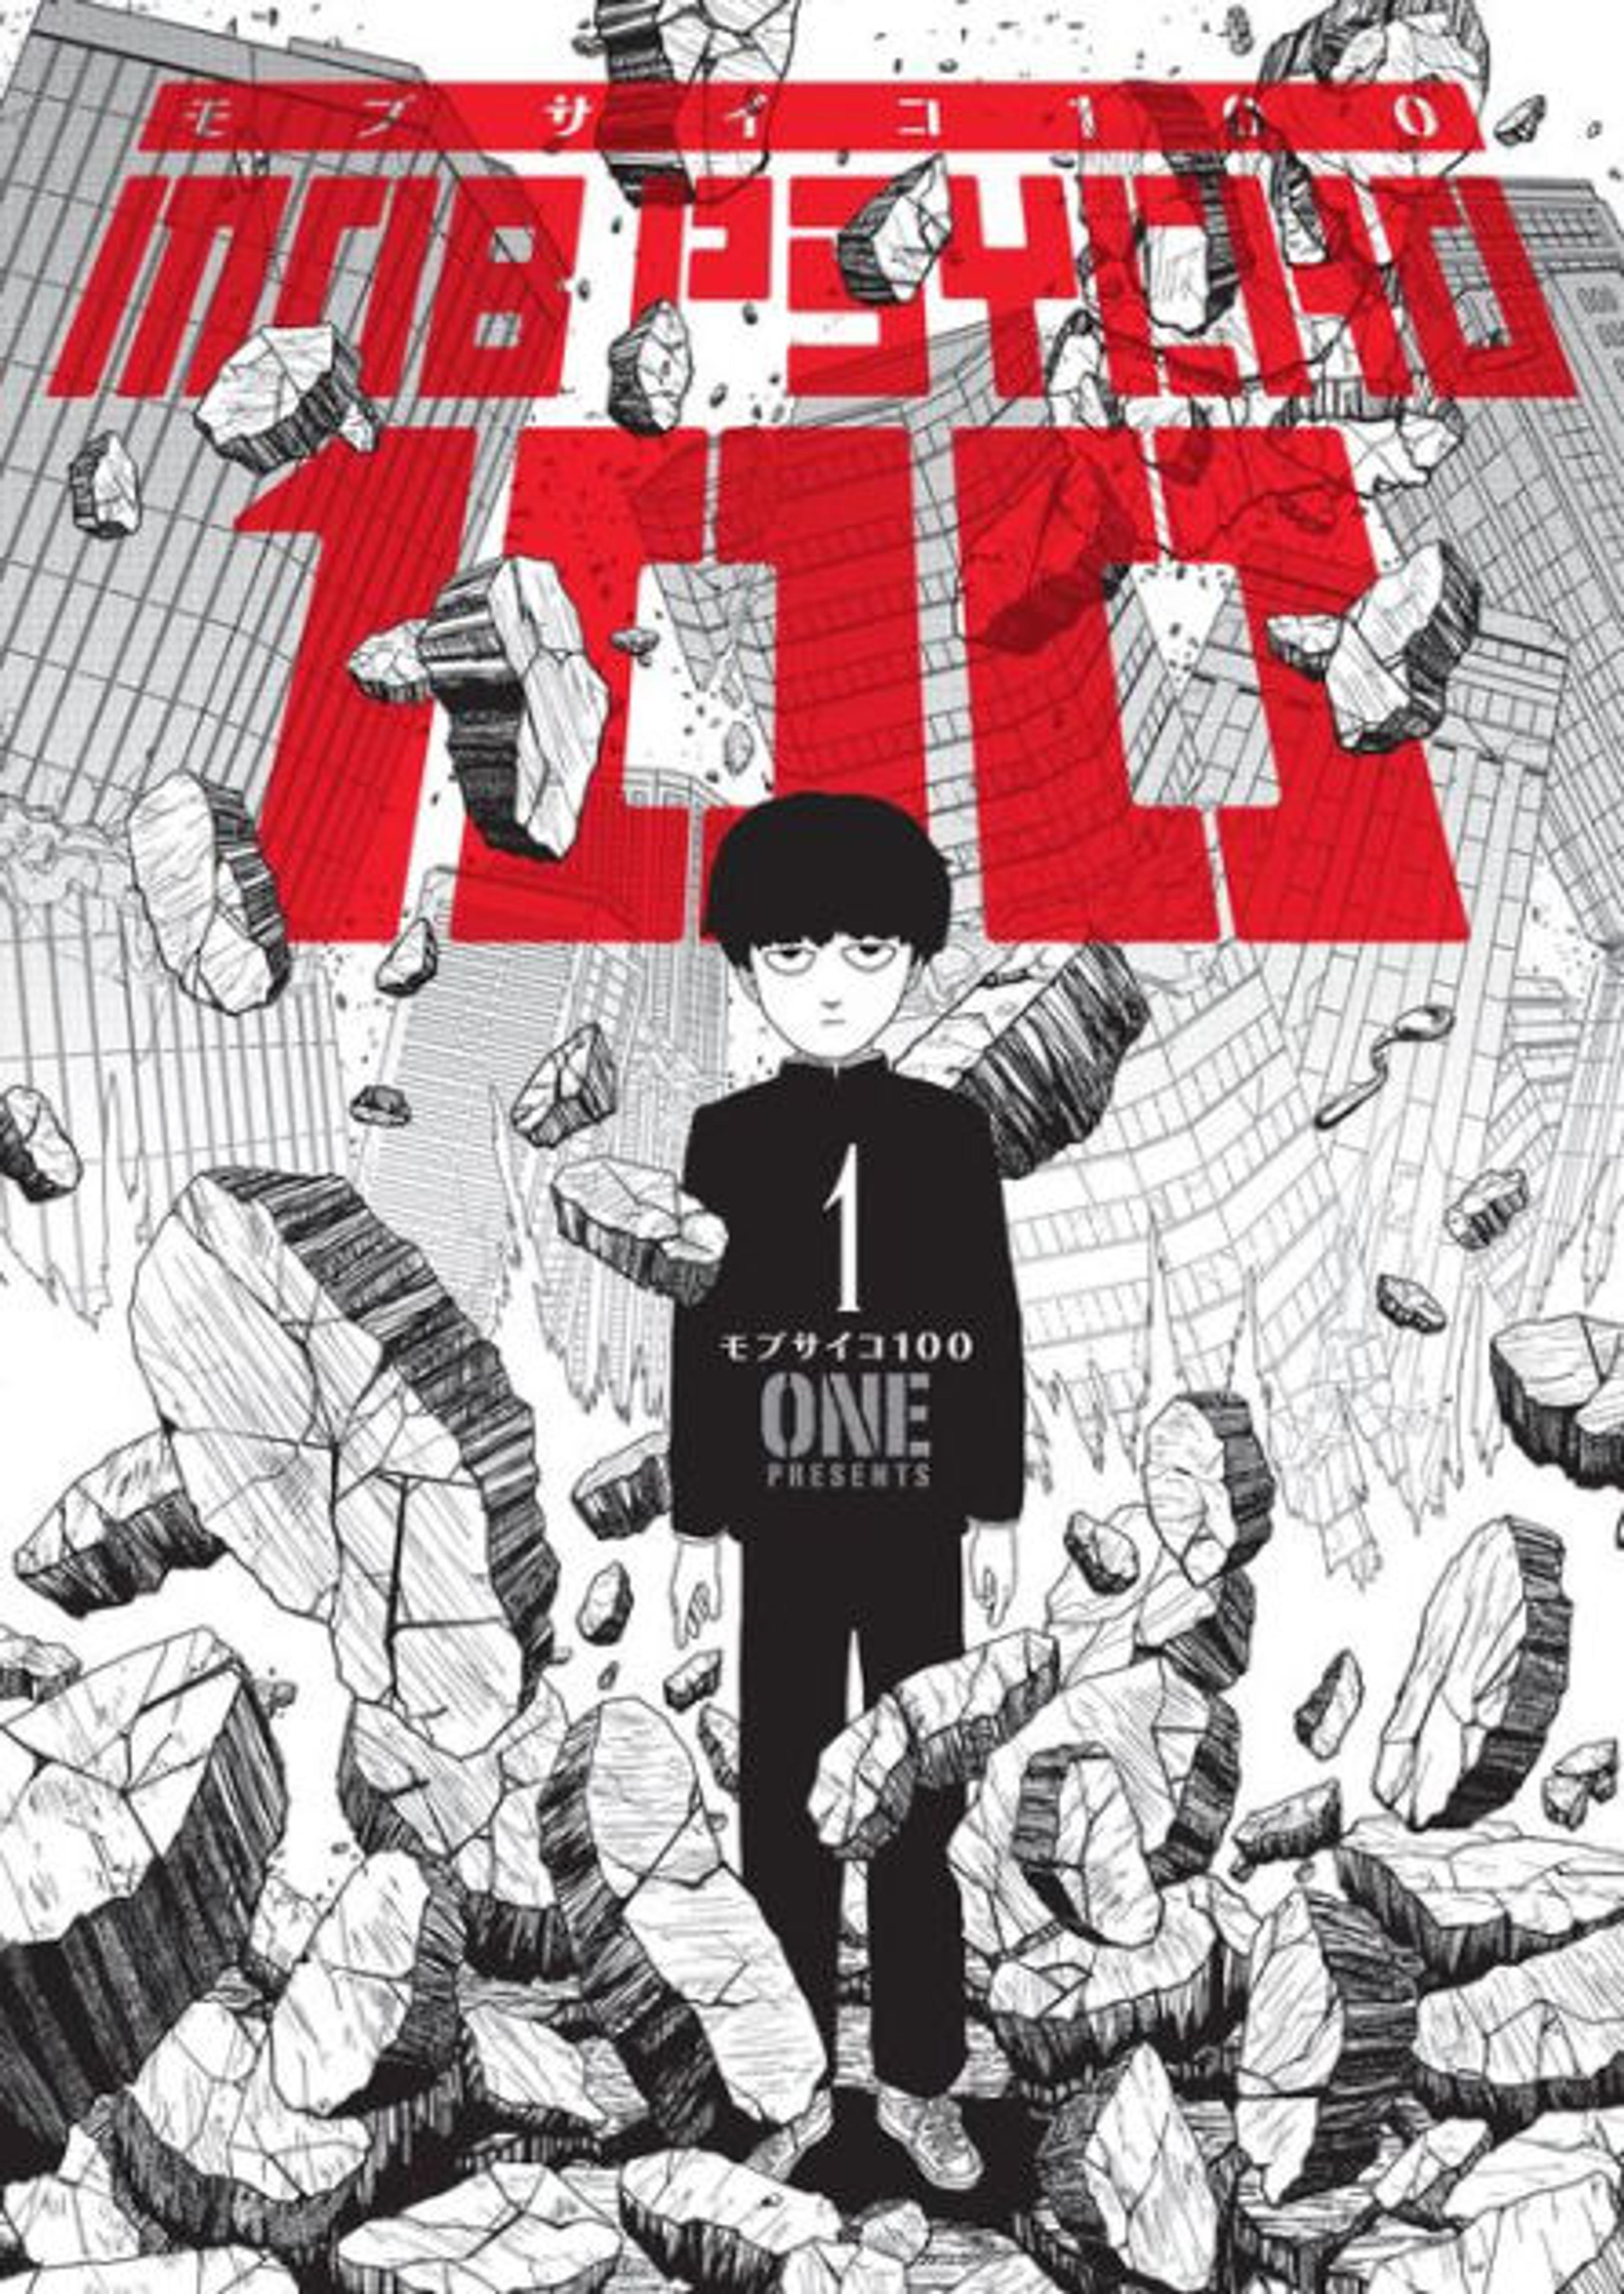 Mob Psycho 100, Volume 1 by ONE, Paperback | Barnes & Noble®